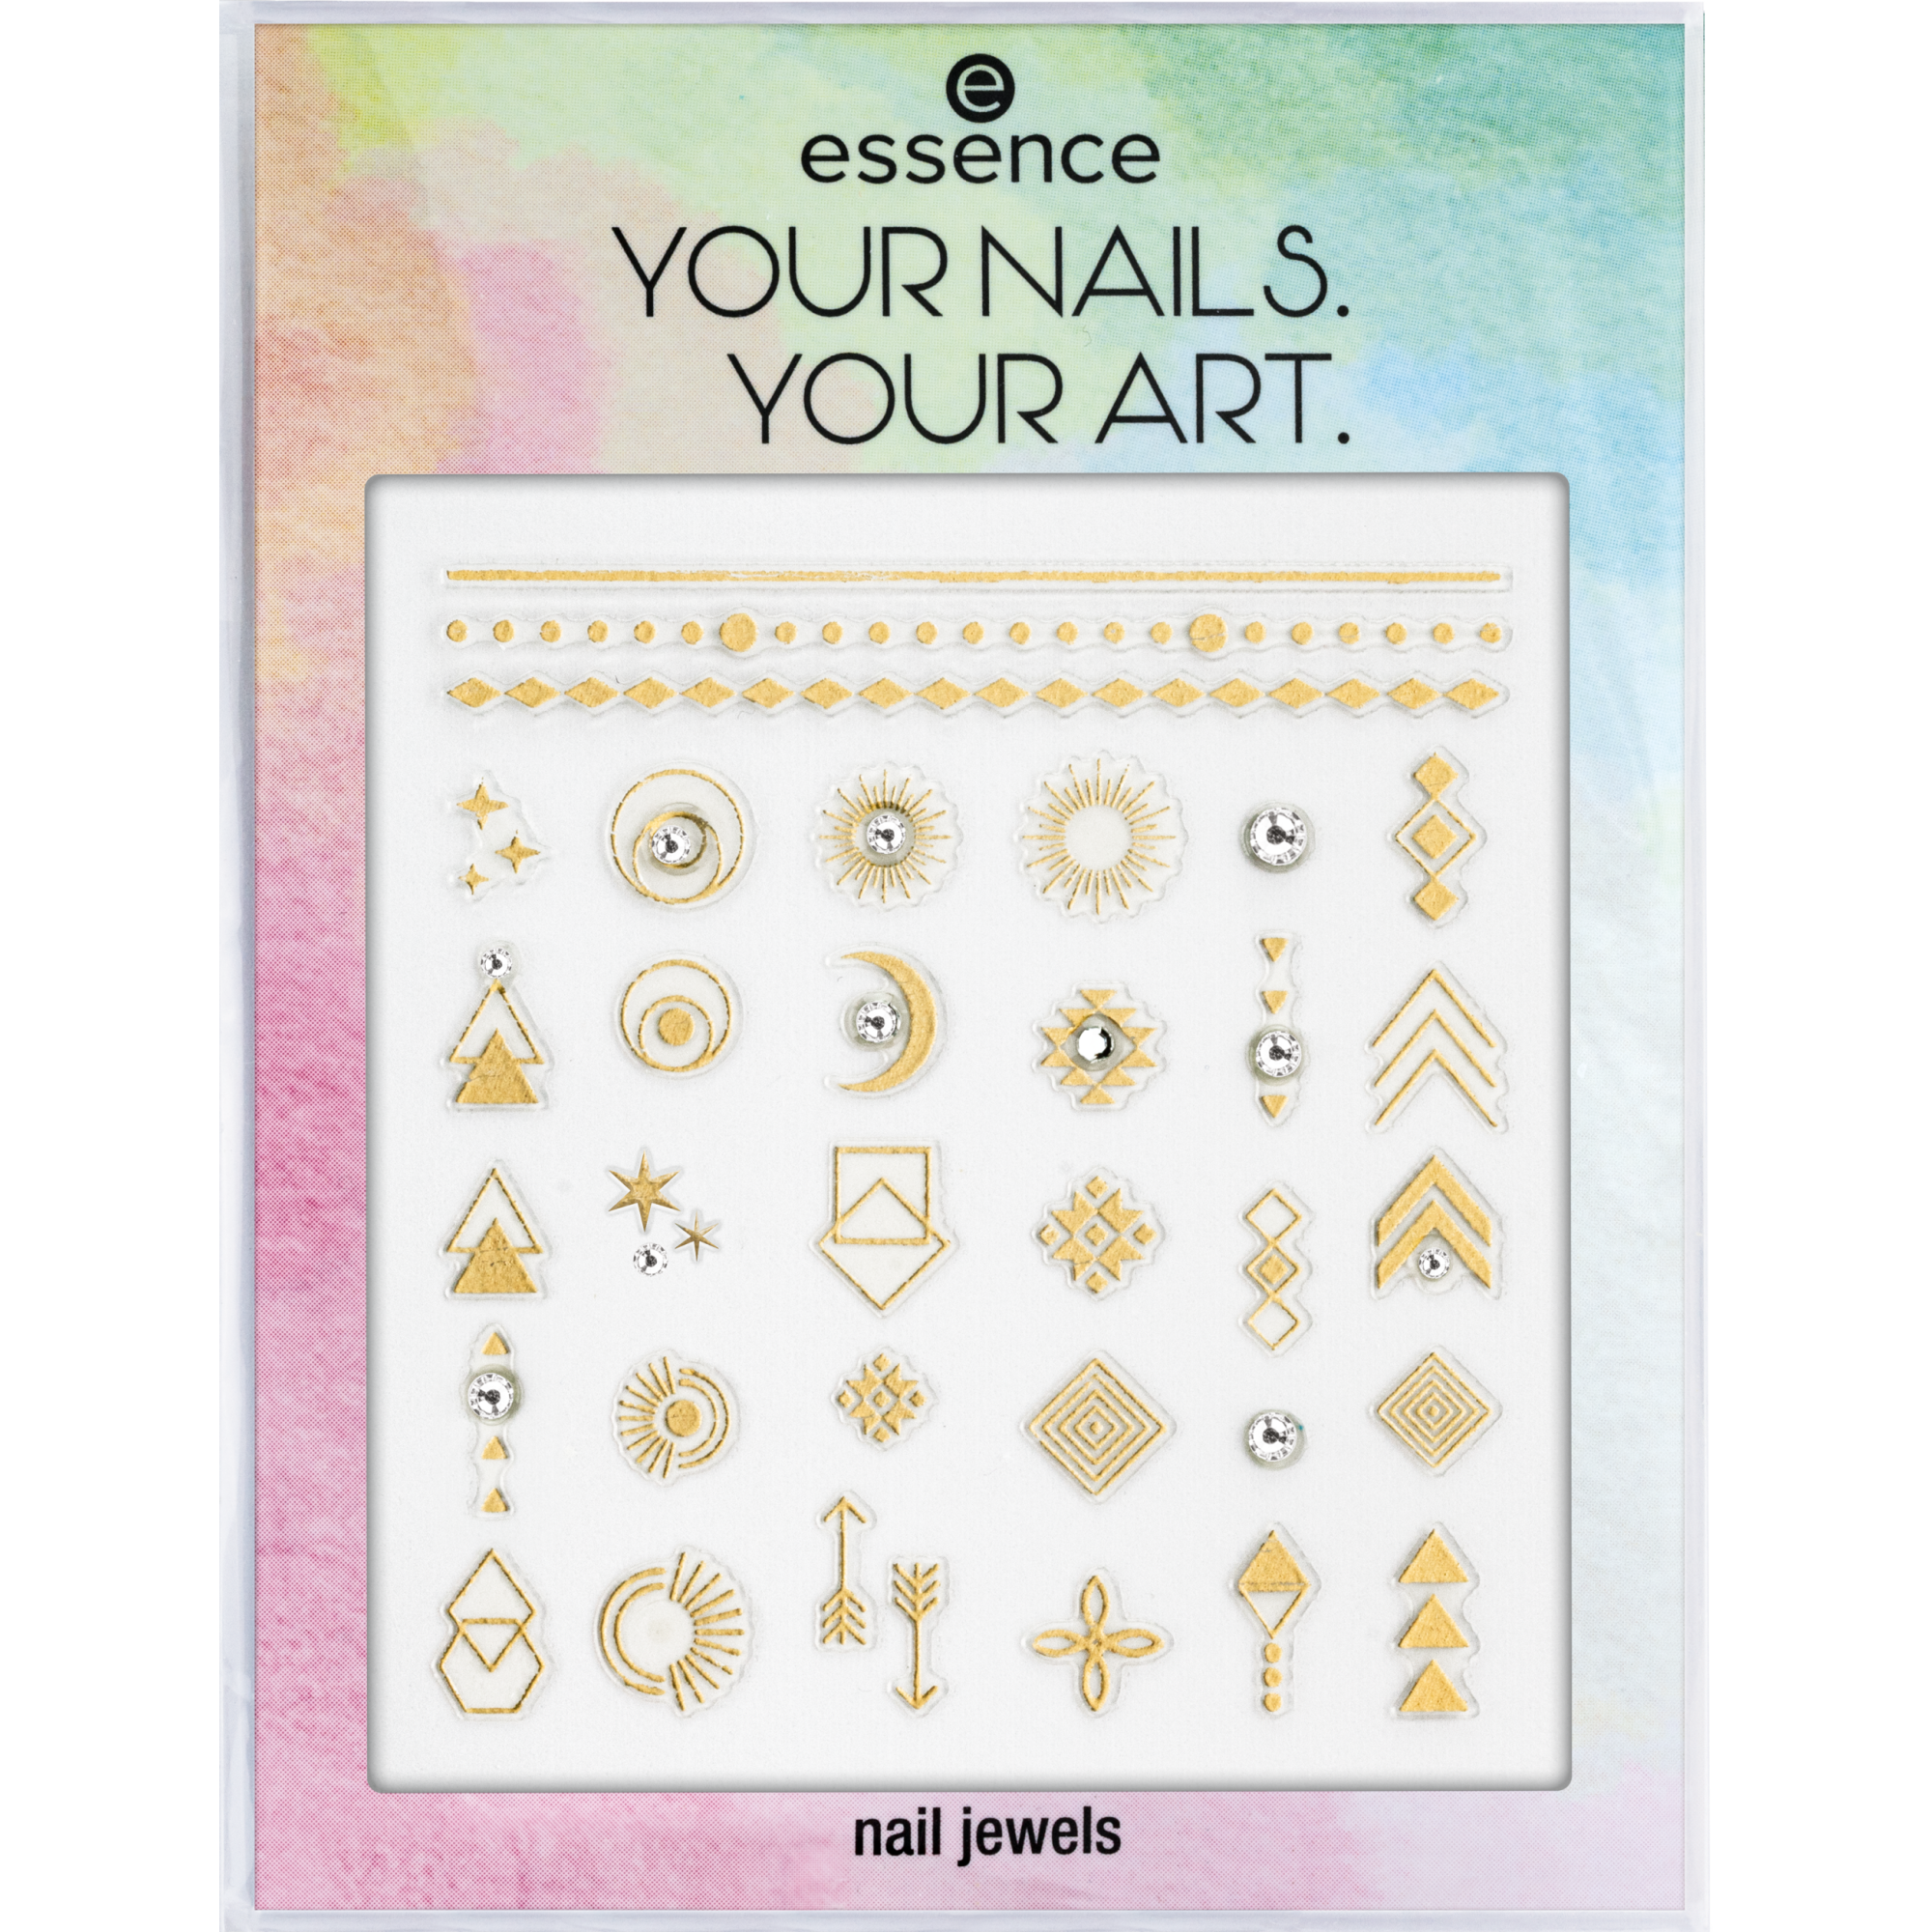 YOUR NAILS. YOUR ART. nail jewels